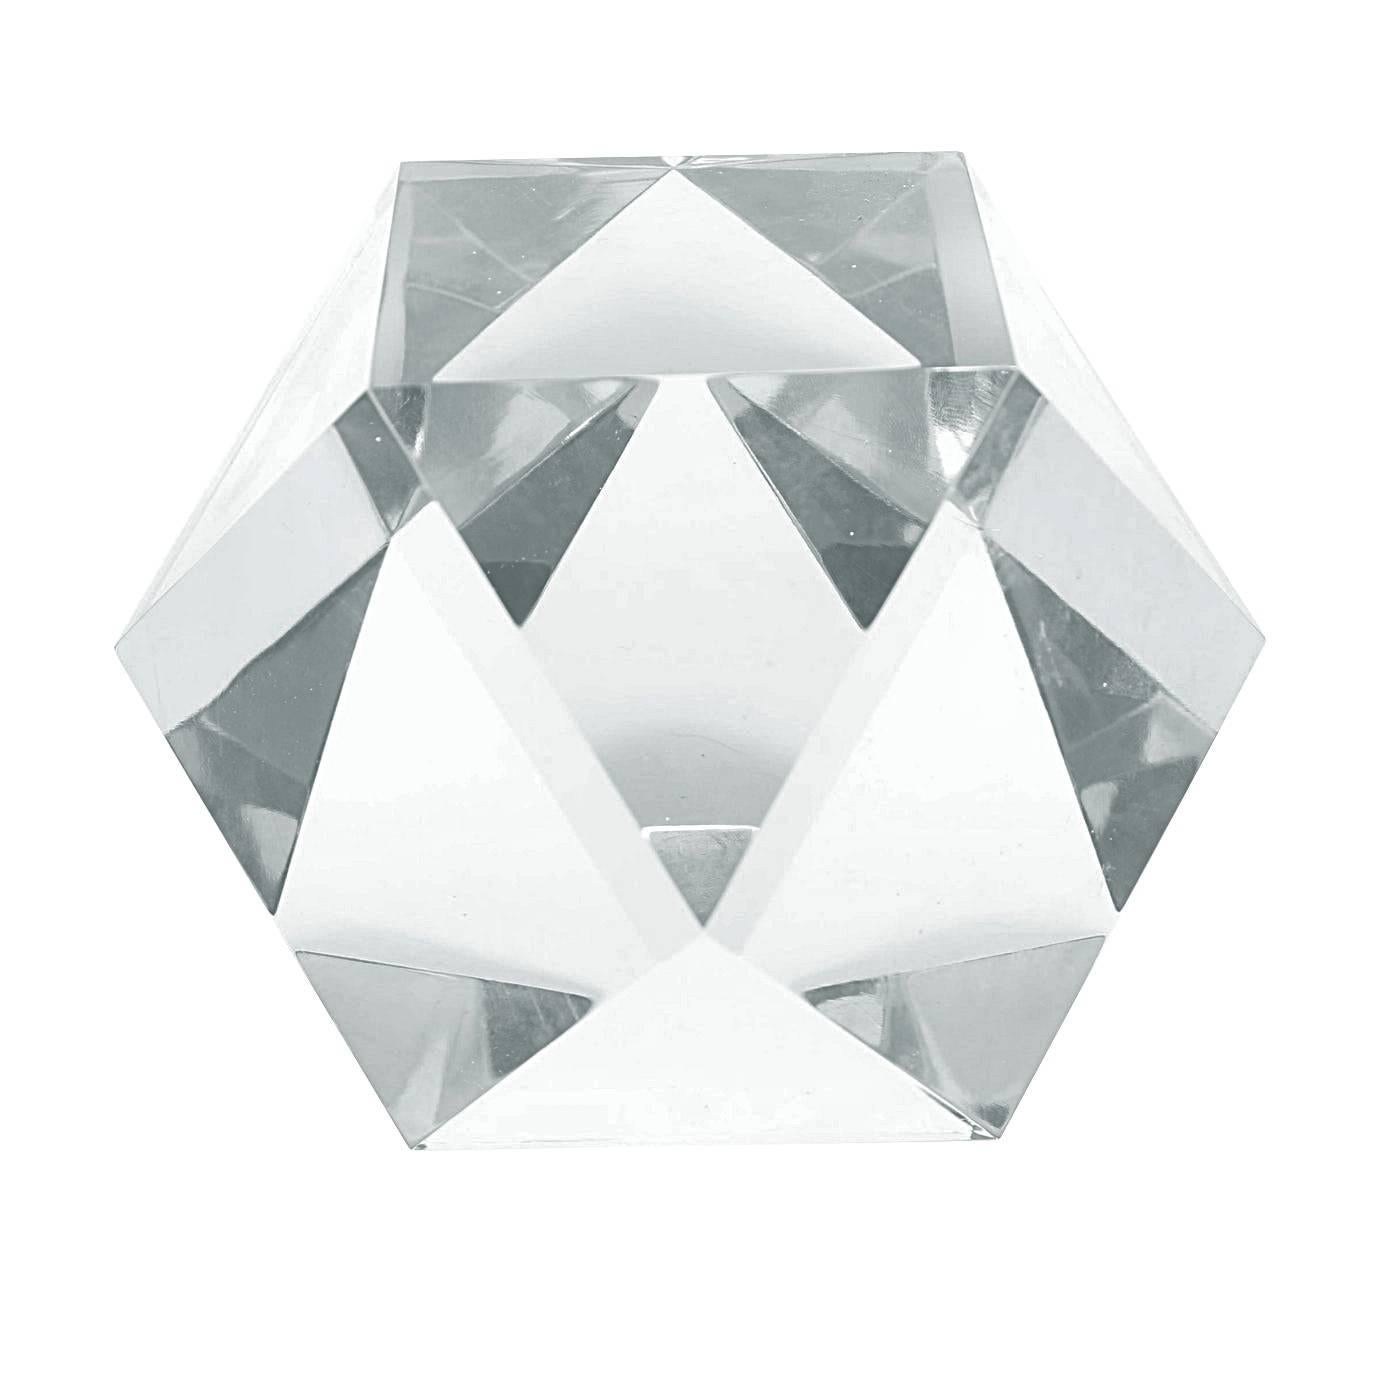 Stunning and beautiful Lucite sculpture by Amparo Calderon Tapia.
The piece is beautifully crafted, the faceted cuts makes this piece shine like a diamond when the light hits it, the piece is also unusually large which is wonderful to be used as a